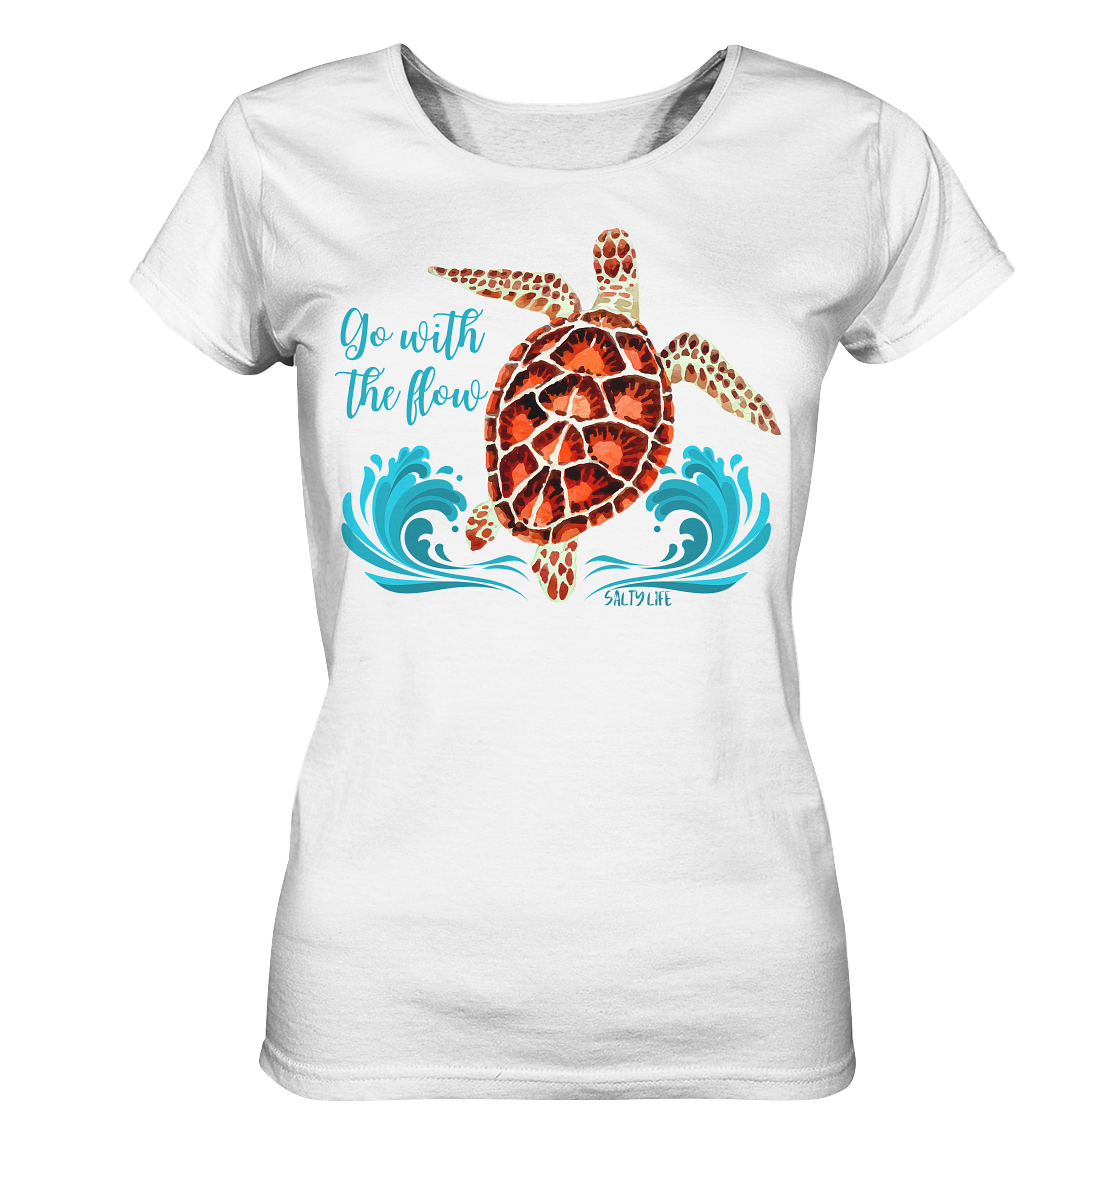 Turtle - Go with the flow  - Ladies Organic Shirt